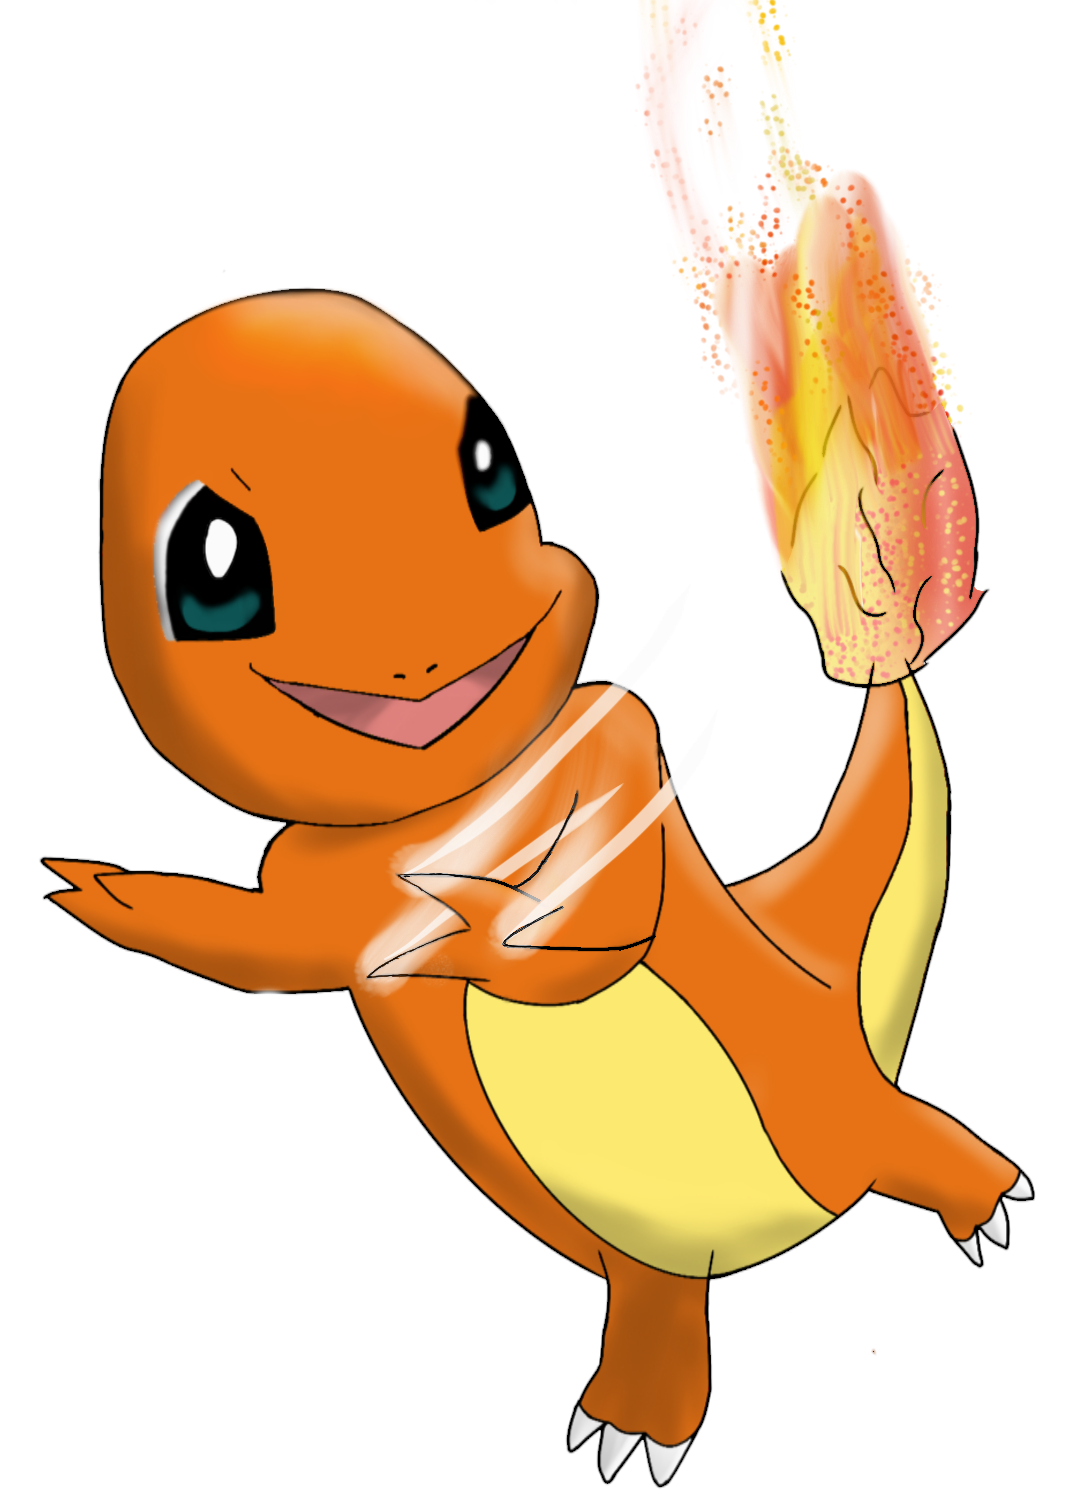 Charmander used Scratch (Pokemon Gen I Tribute on Game-Art-HQ.com) by CrazyInfin8